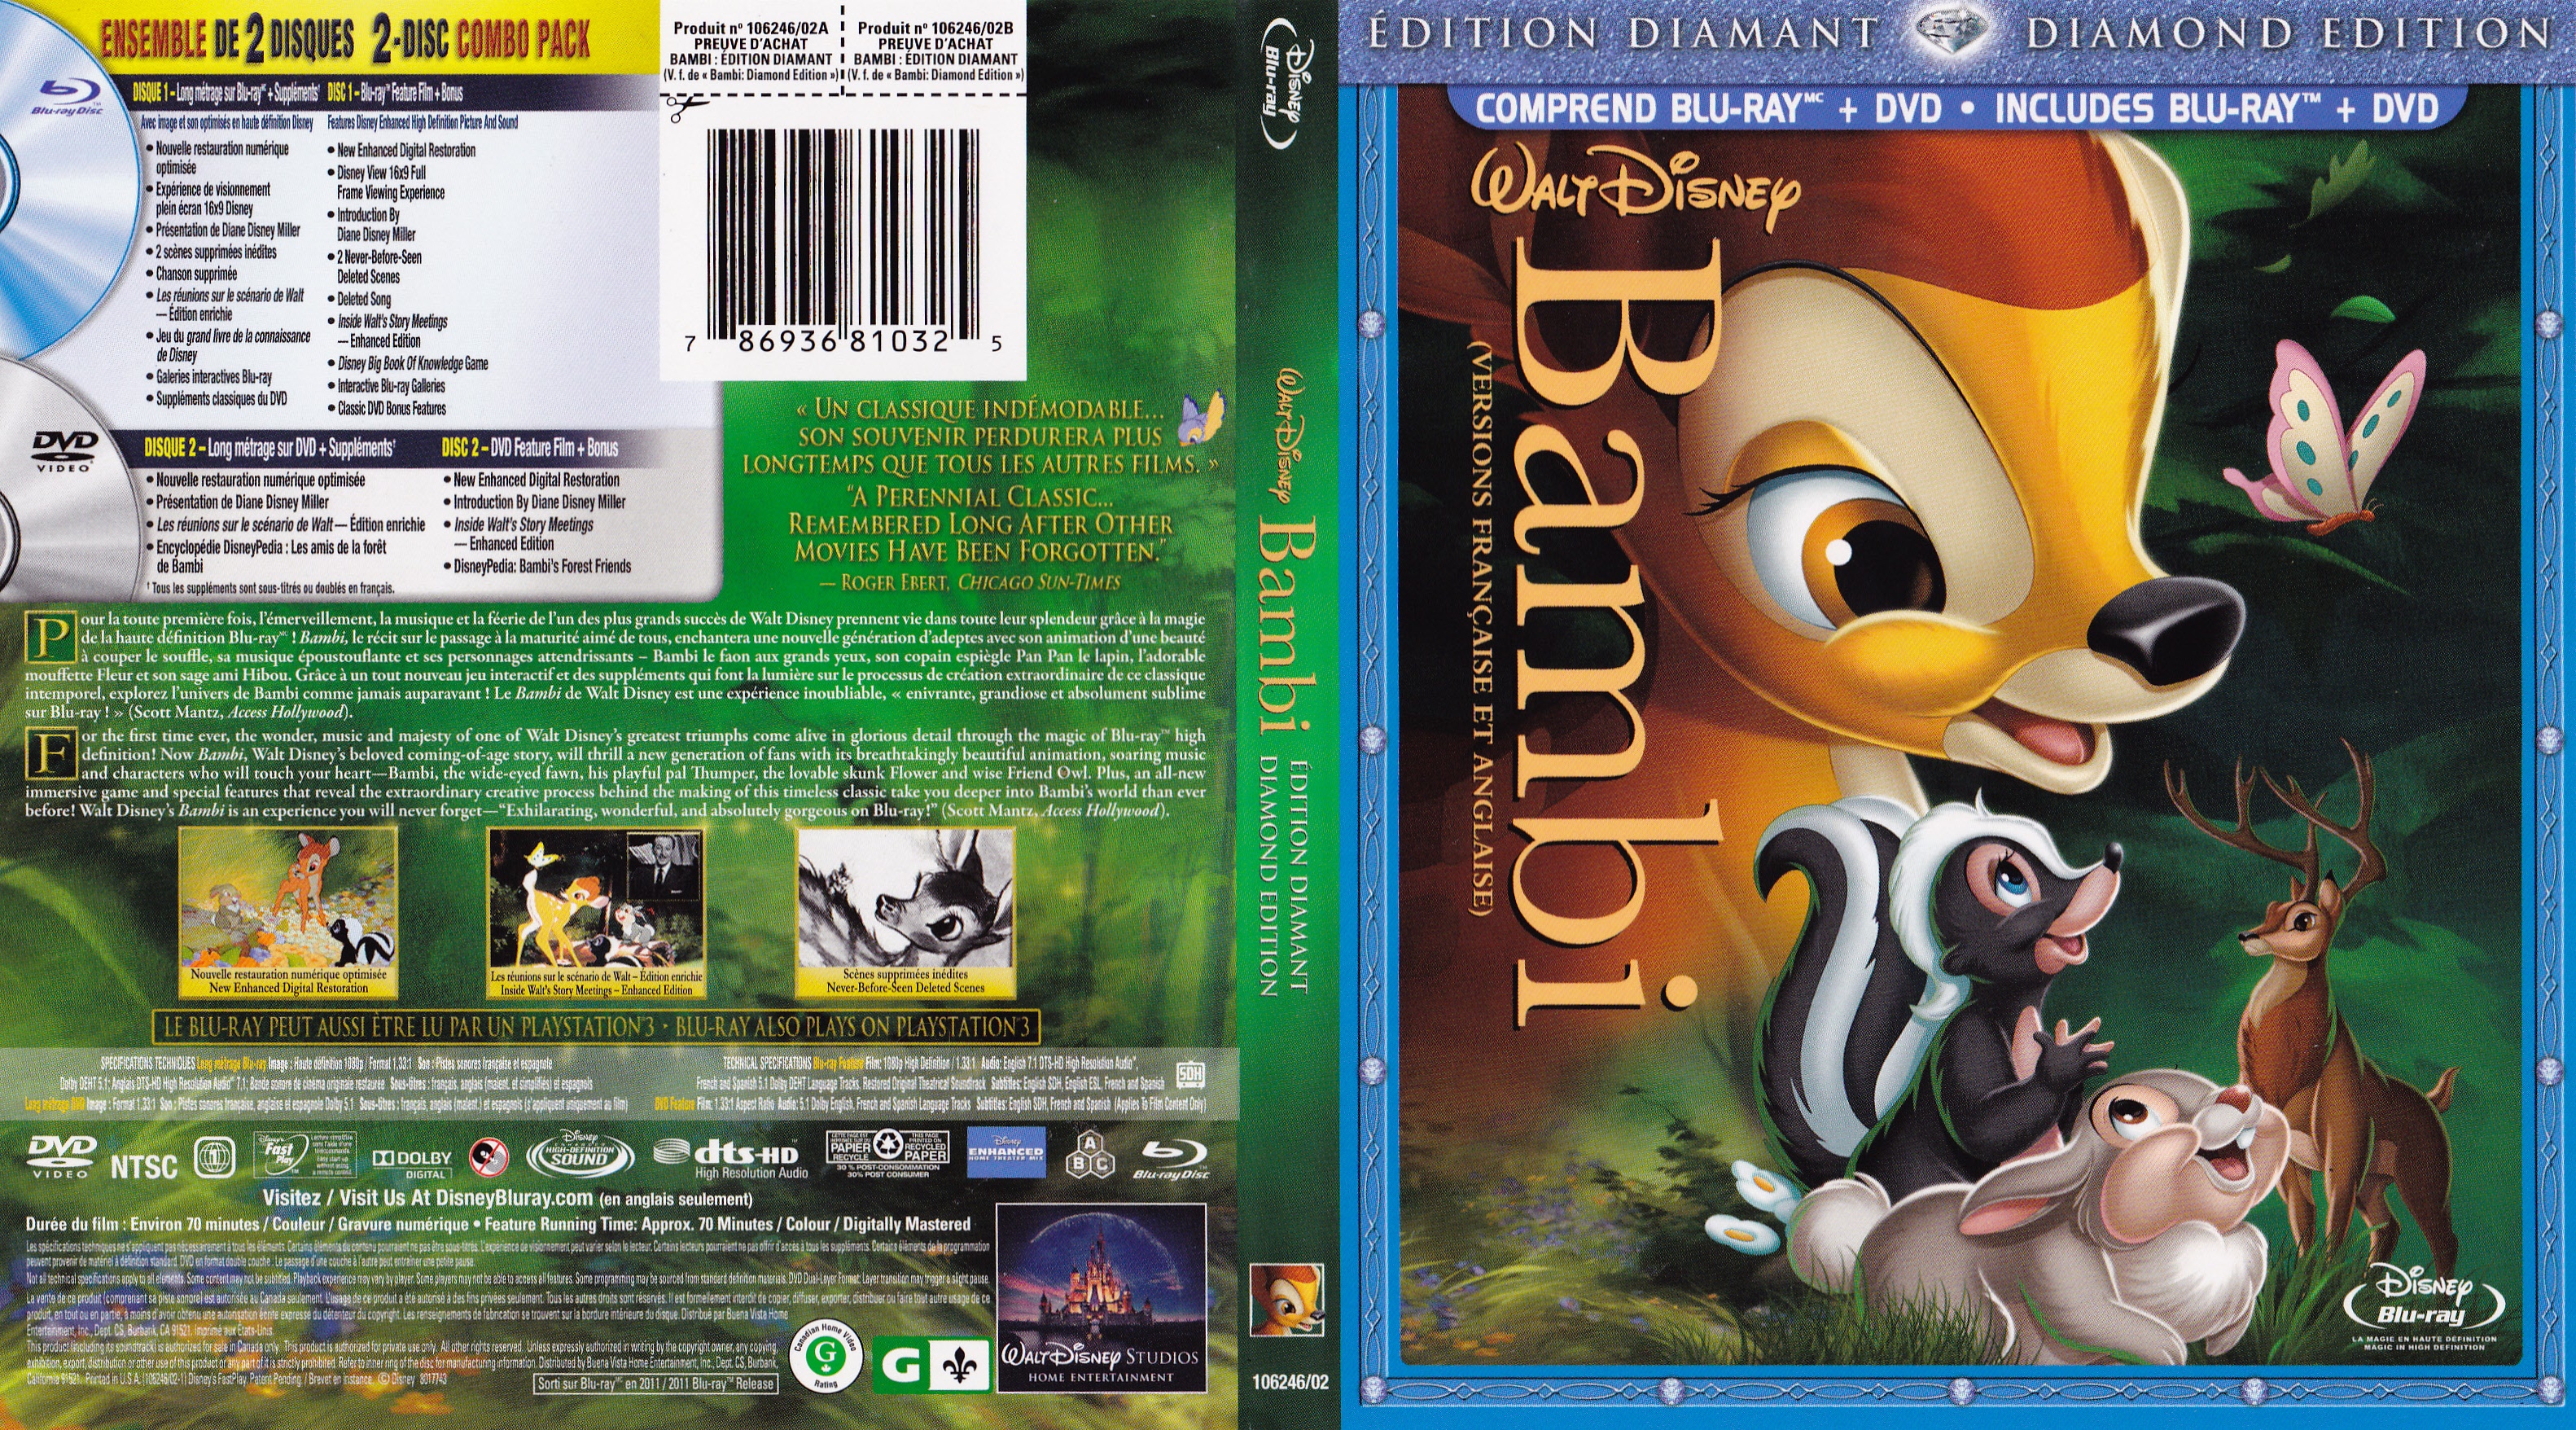 Jaquette DVD Bambi (Canadienne) (BLU-RAY)